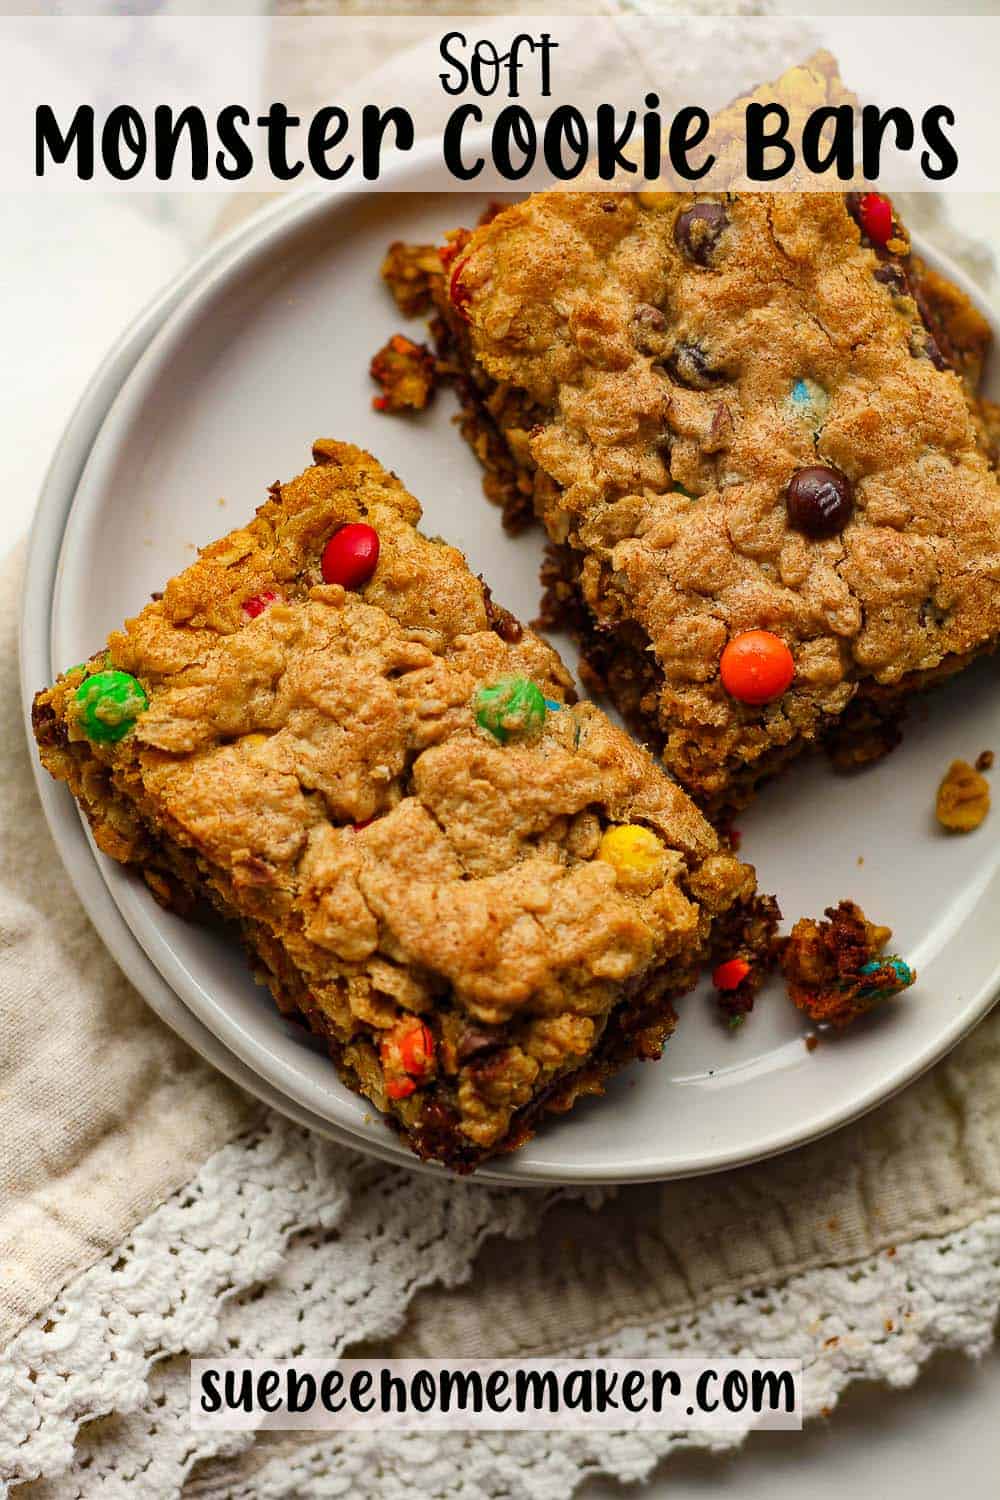 A plate of two soft monster cookie bars.